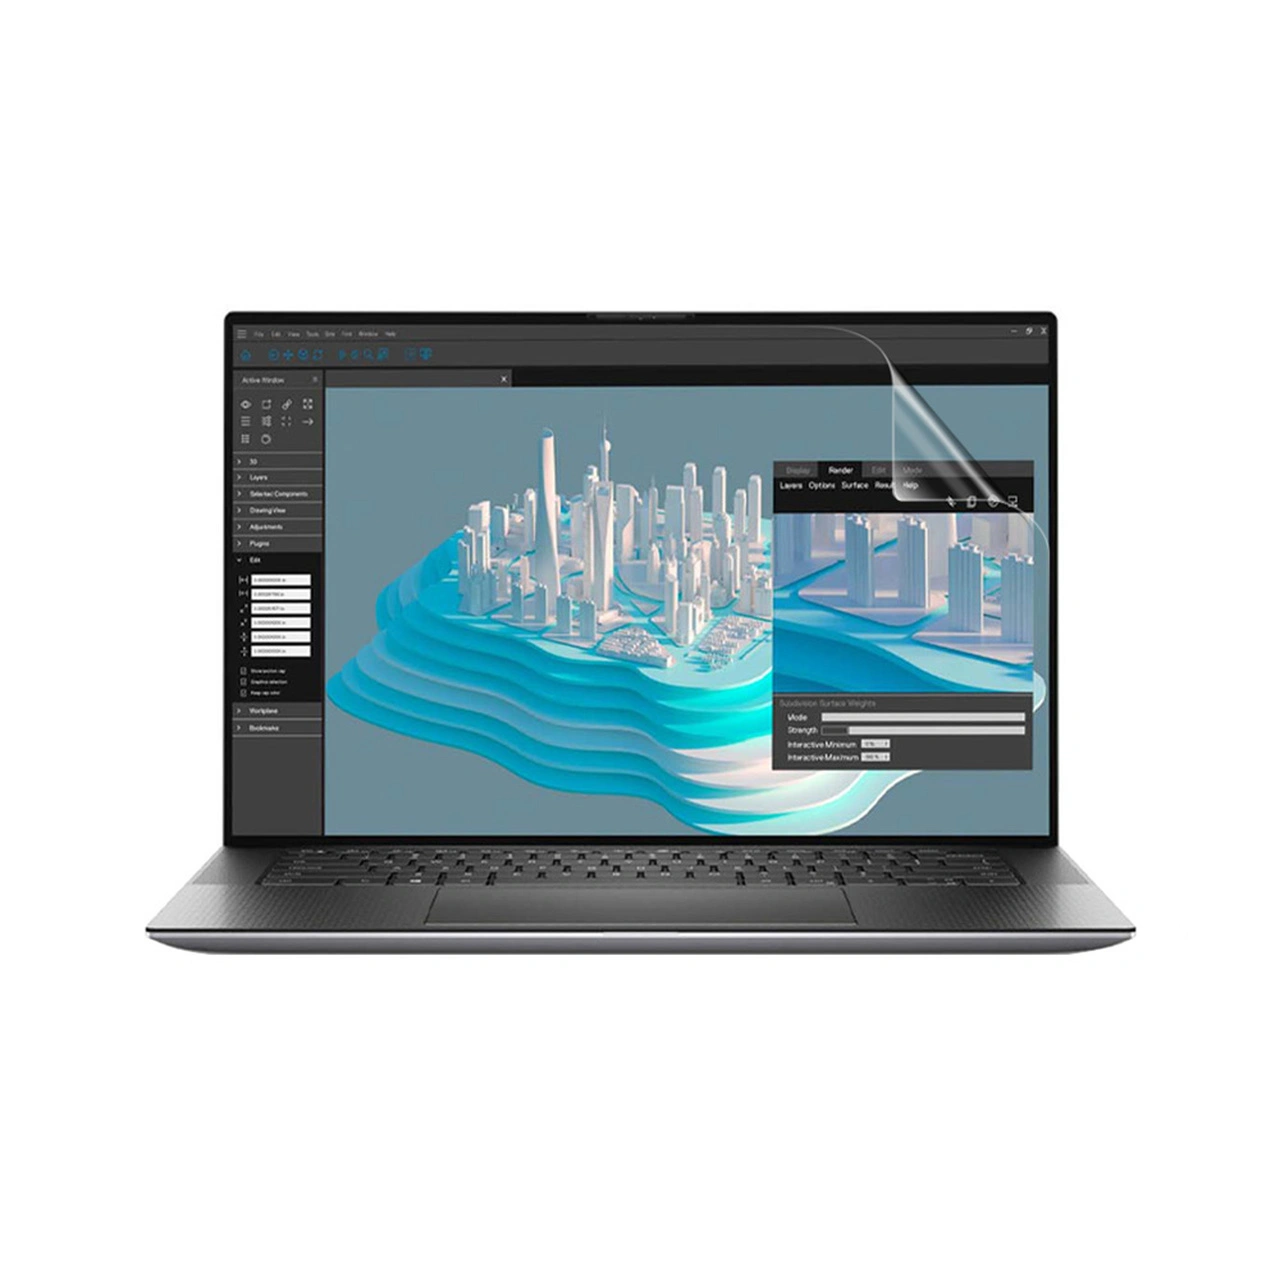 [New Outlet] Laptop Dell Precision 5560 - Intel Core i7-11850H | 16GB | Nvidia A2000 | 15.6 inch Full HD+